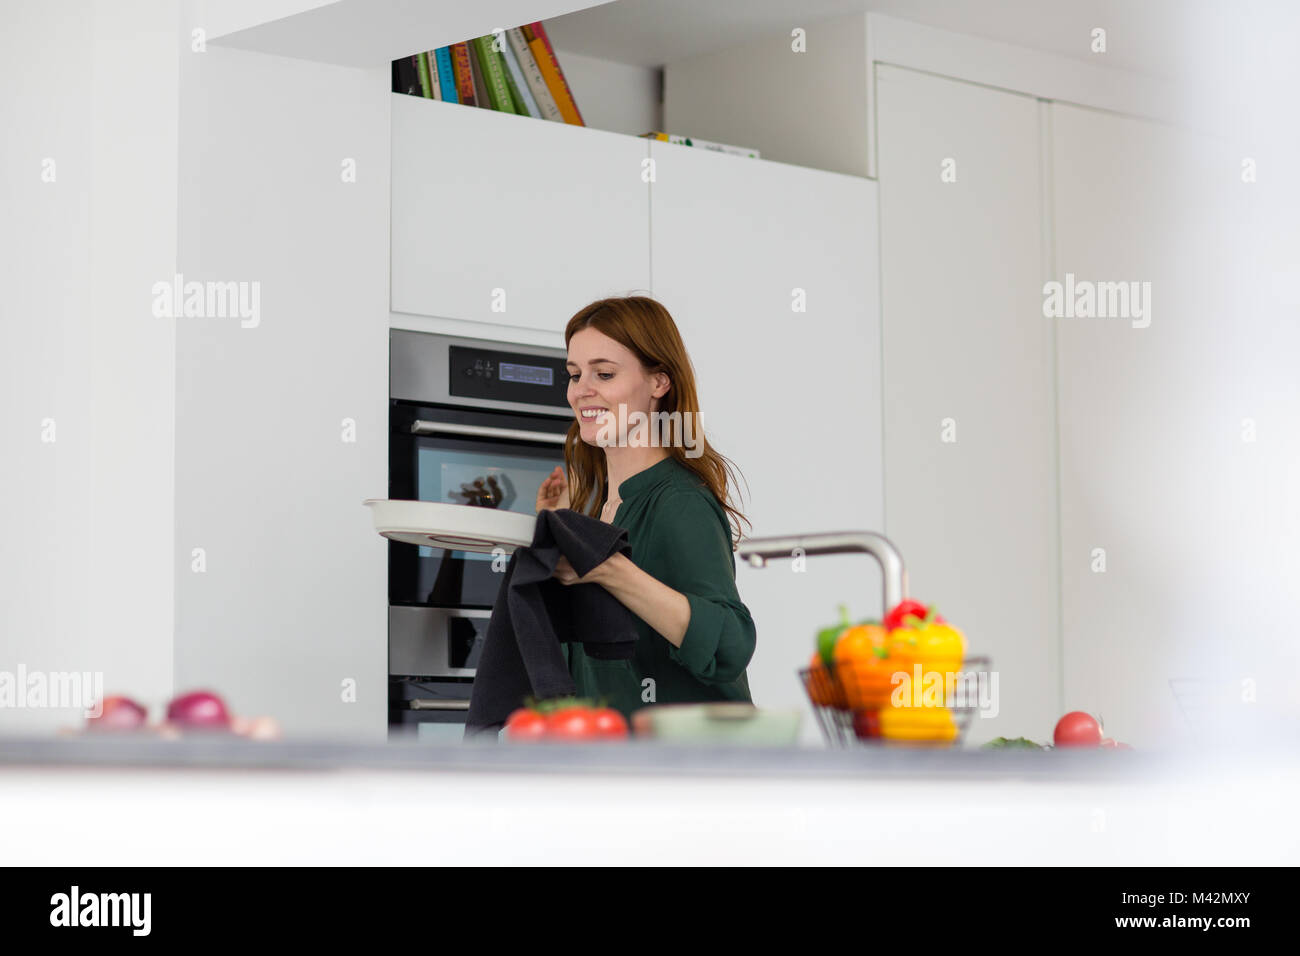 Adult female taking dish out of oven Stock Photo